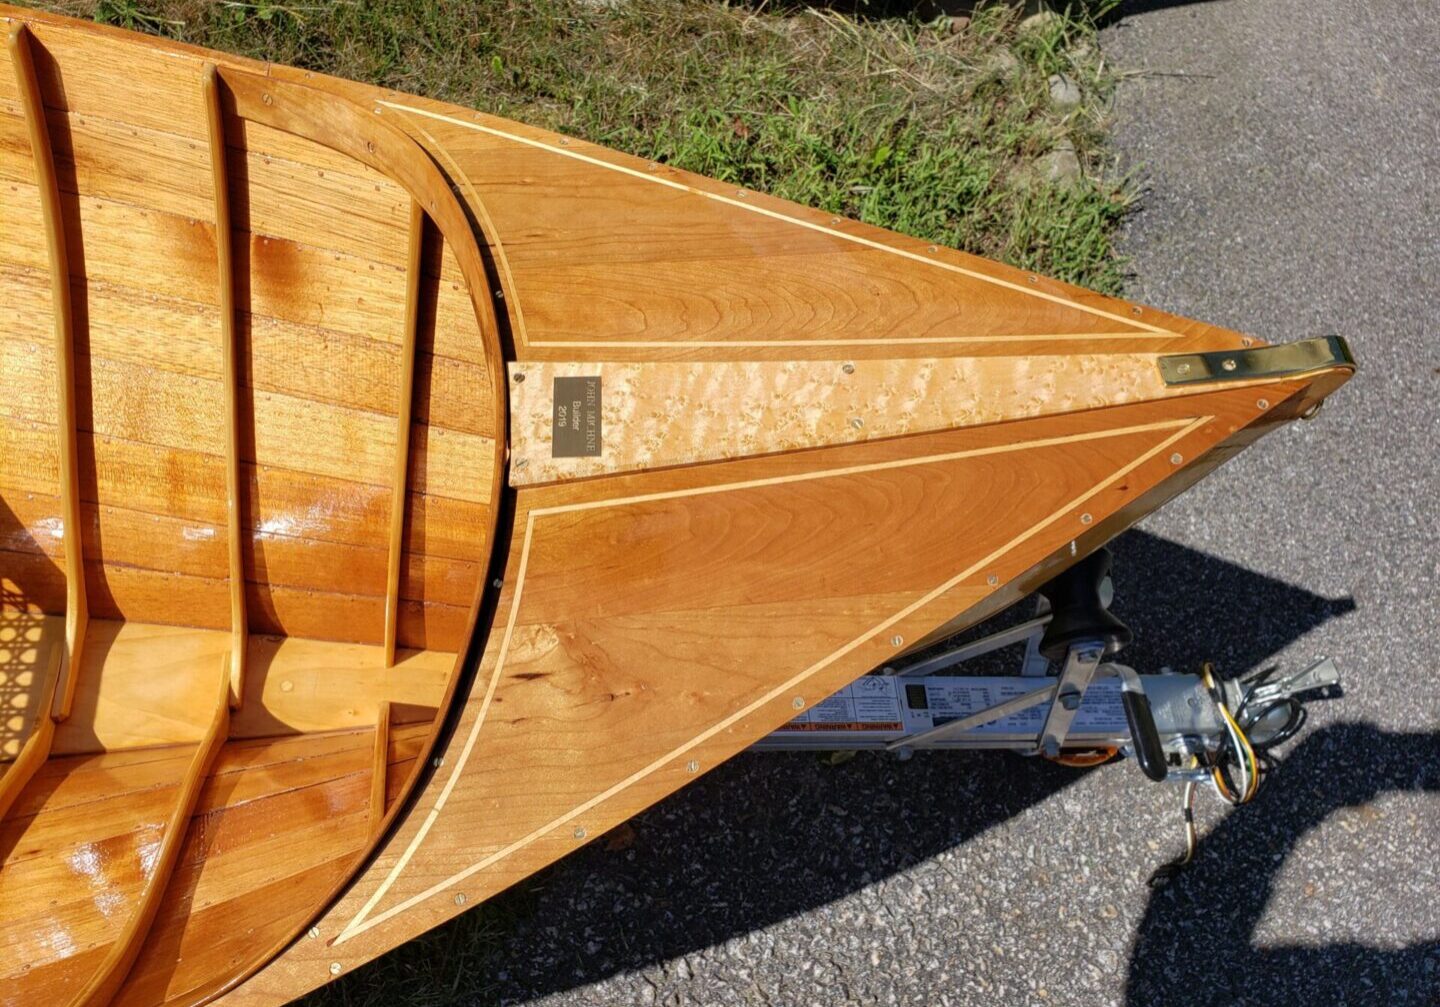 A wooden boat built by John D. Michne